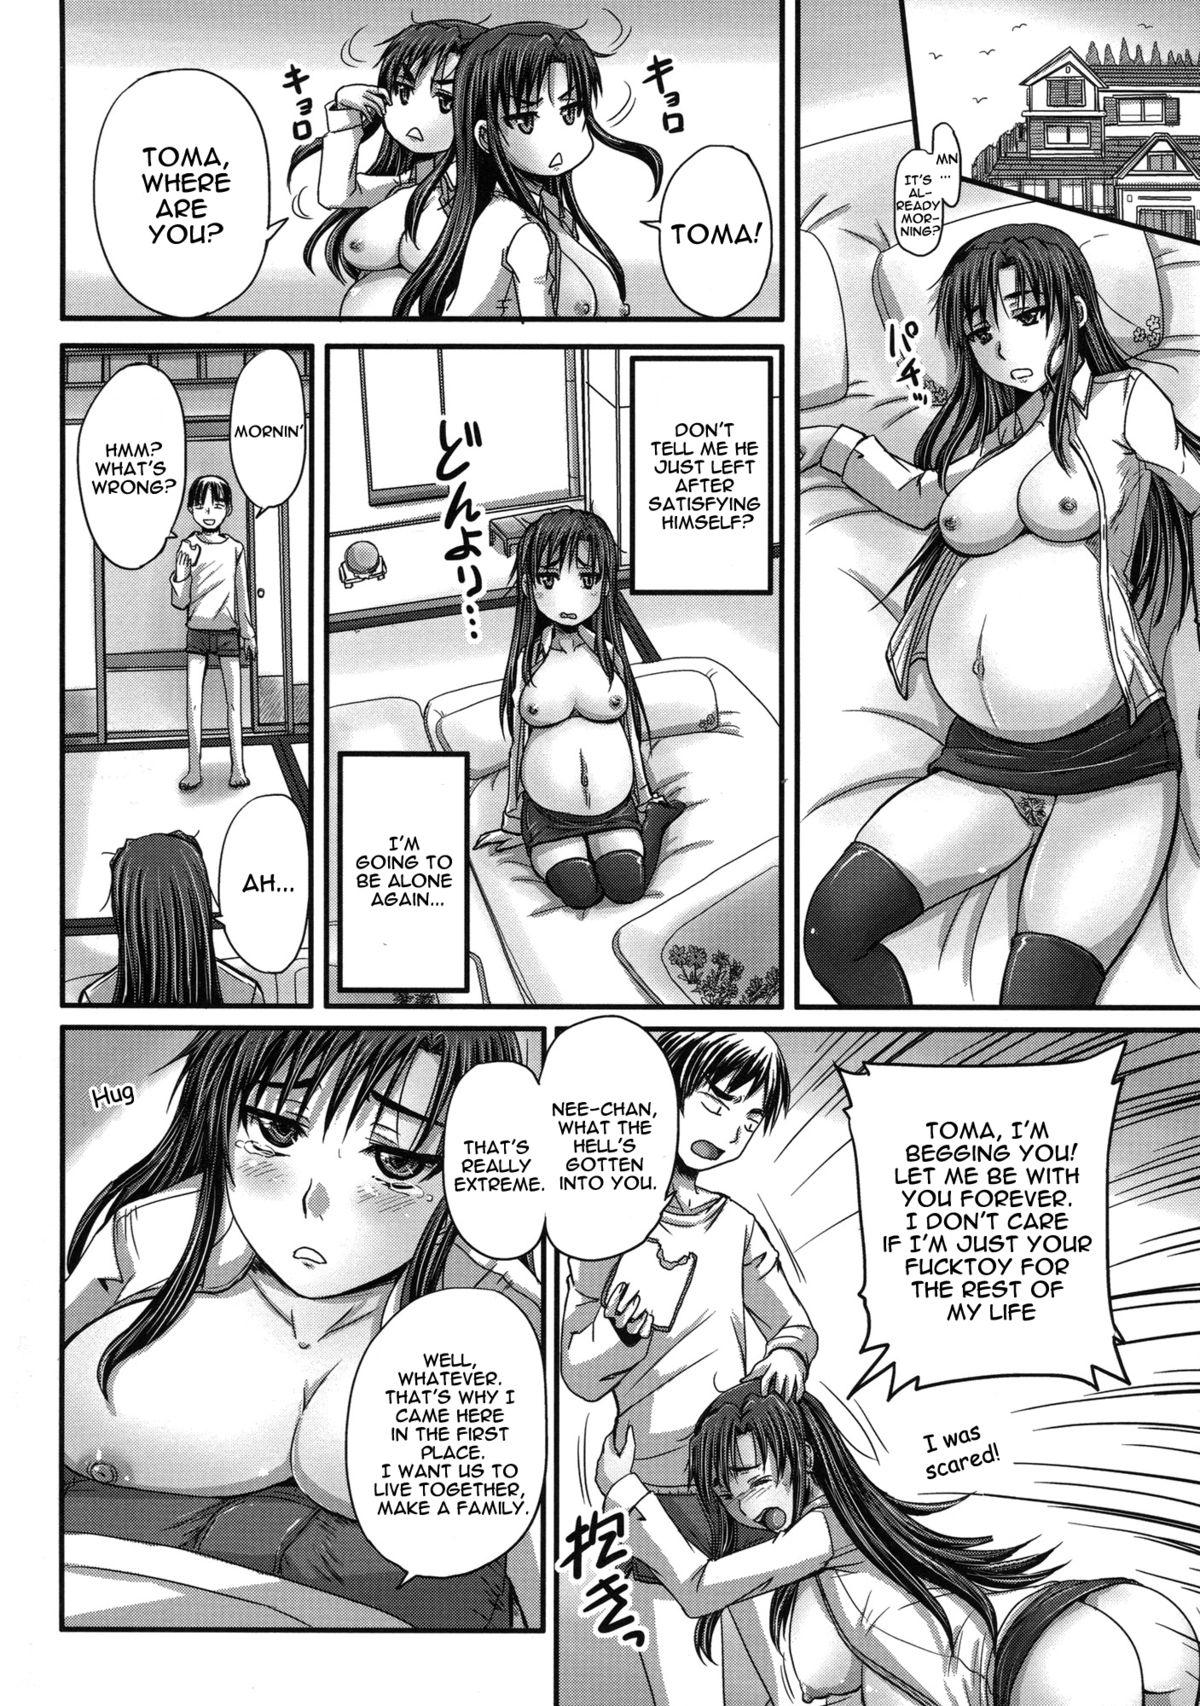 [Akigami Satoru] Tsukurou! Onaho Ane - Let's made a Sex Sleeve from Sister | Turning My Elder-Sister into a Sex-Sleeve [English] {doujin-moe.us} 82